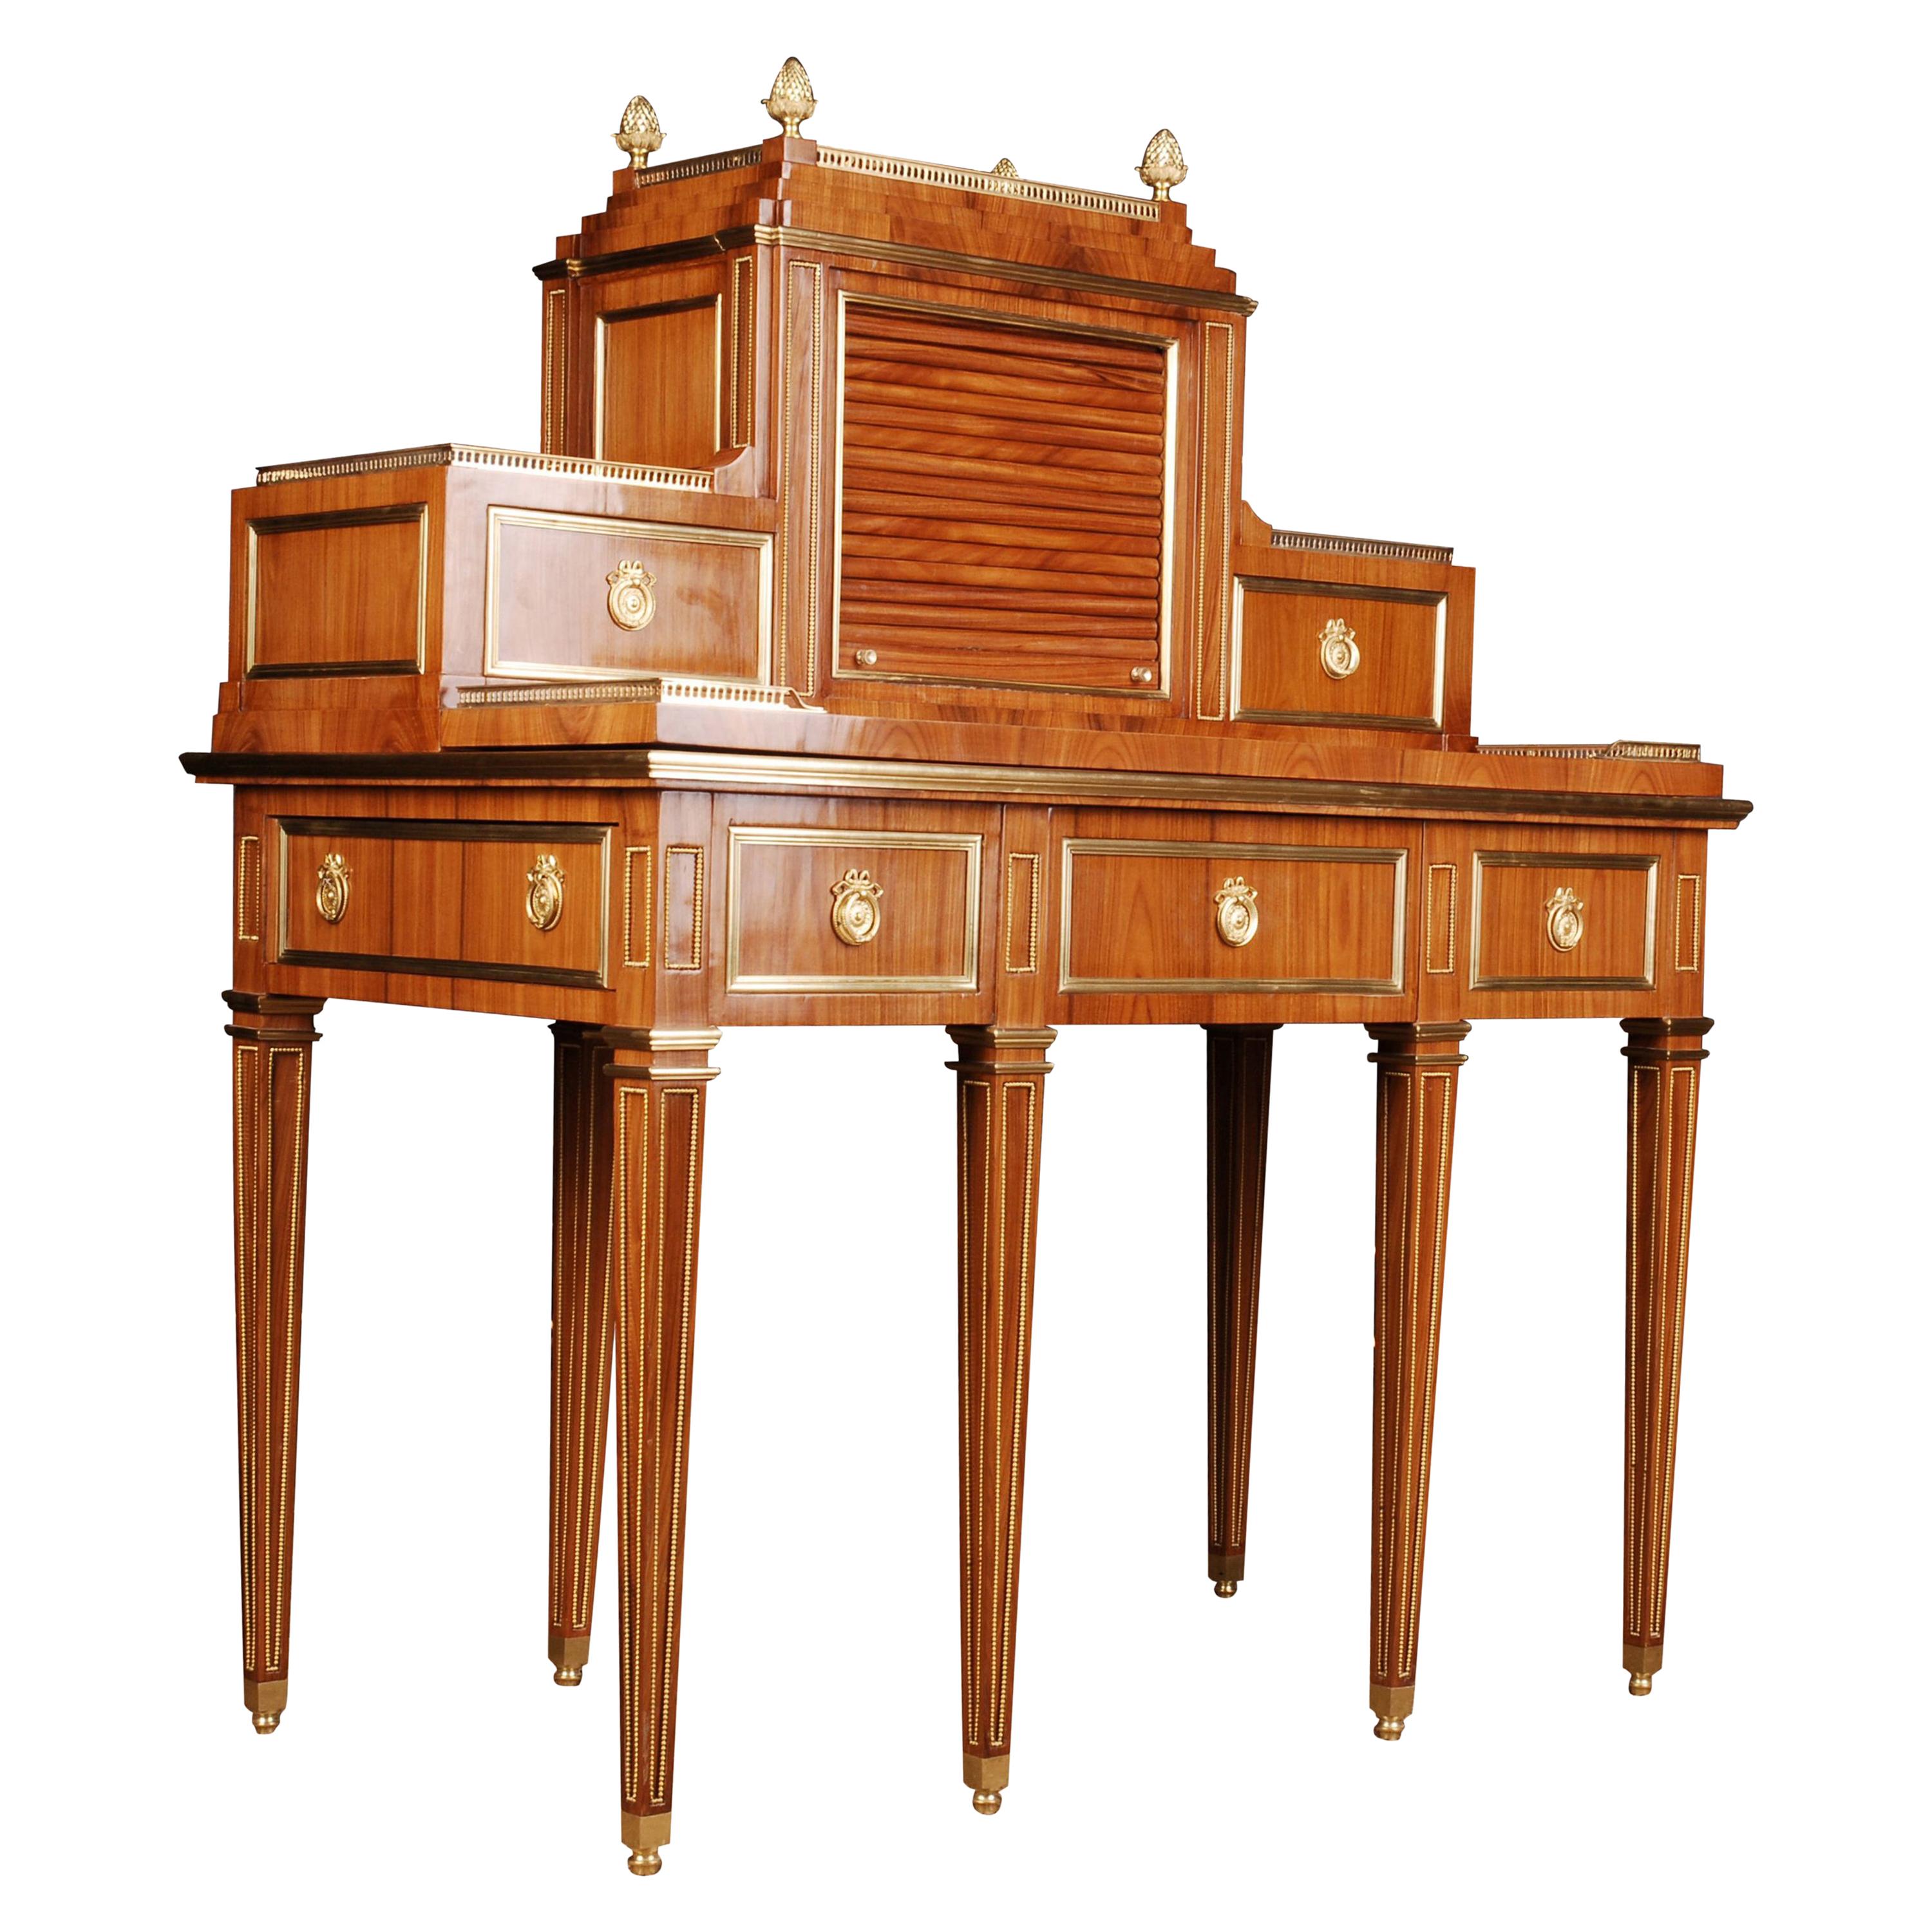 Writing Desk or Conversion Table after antique David Roentgen, 1780-1795 